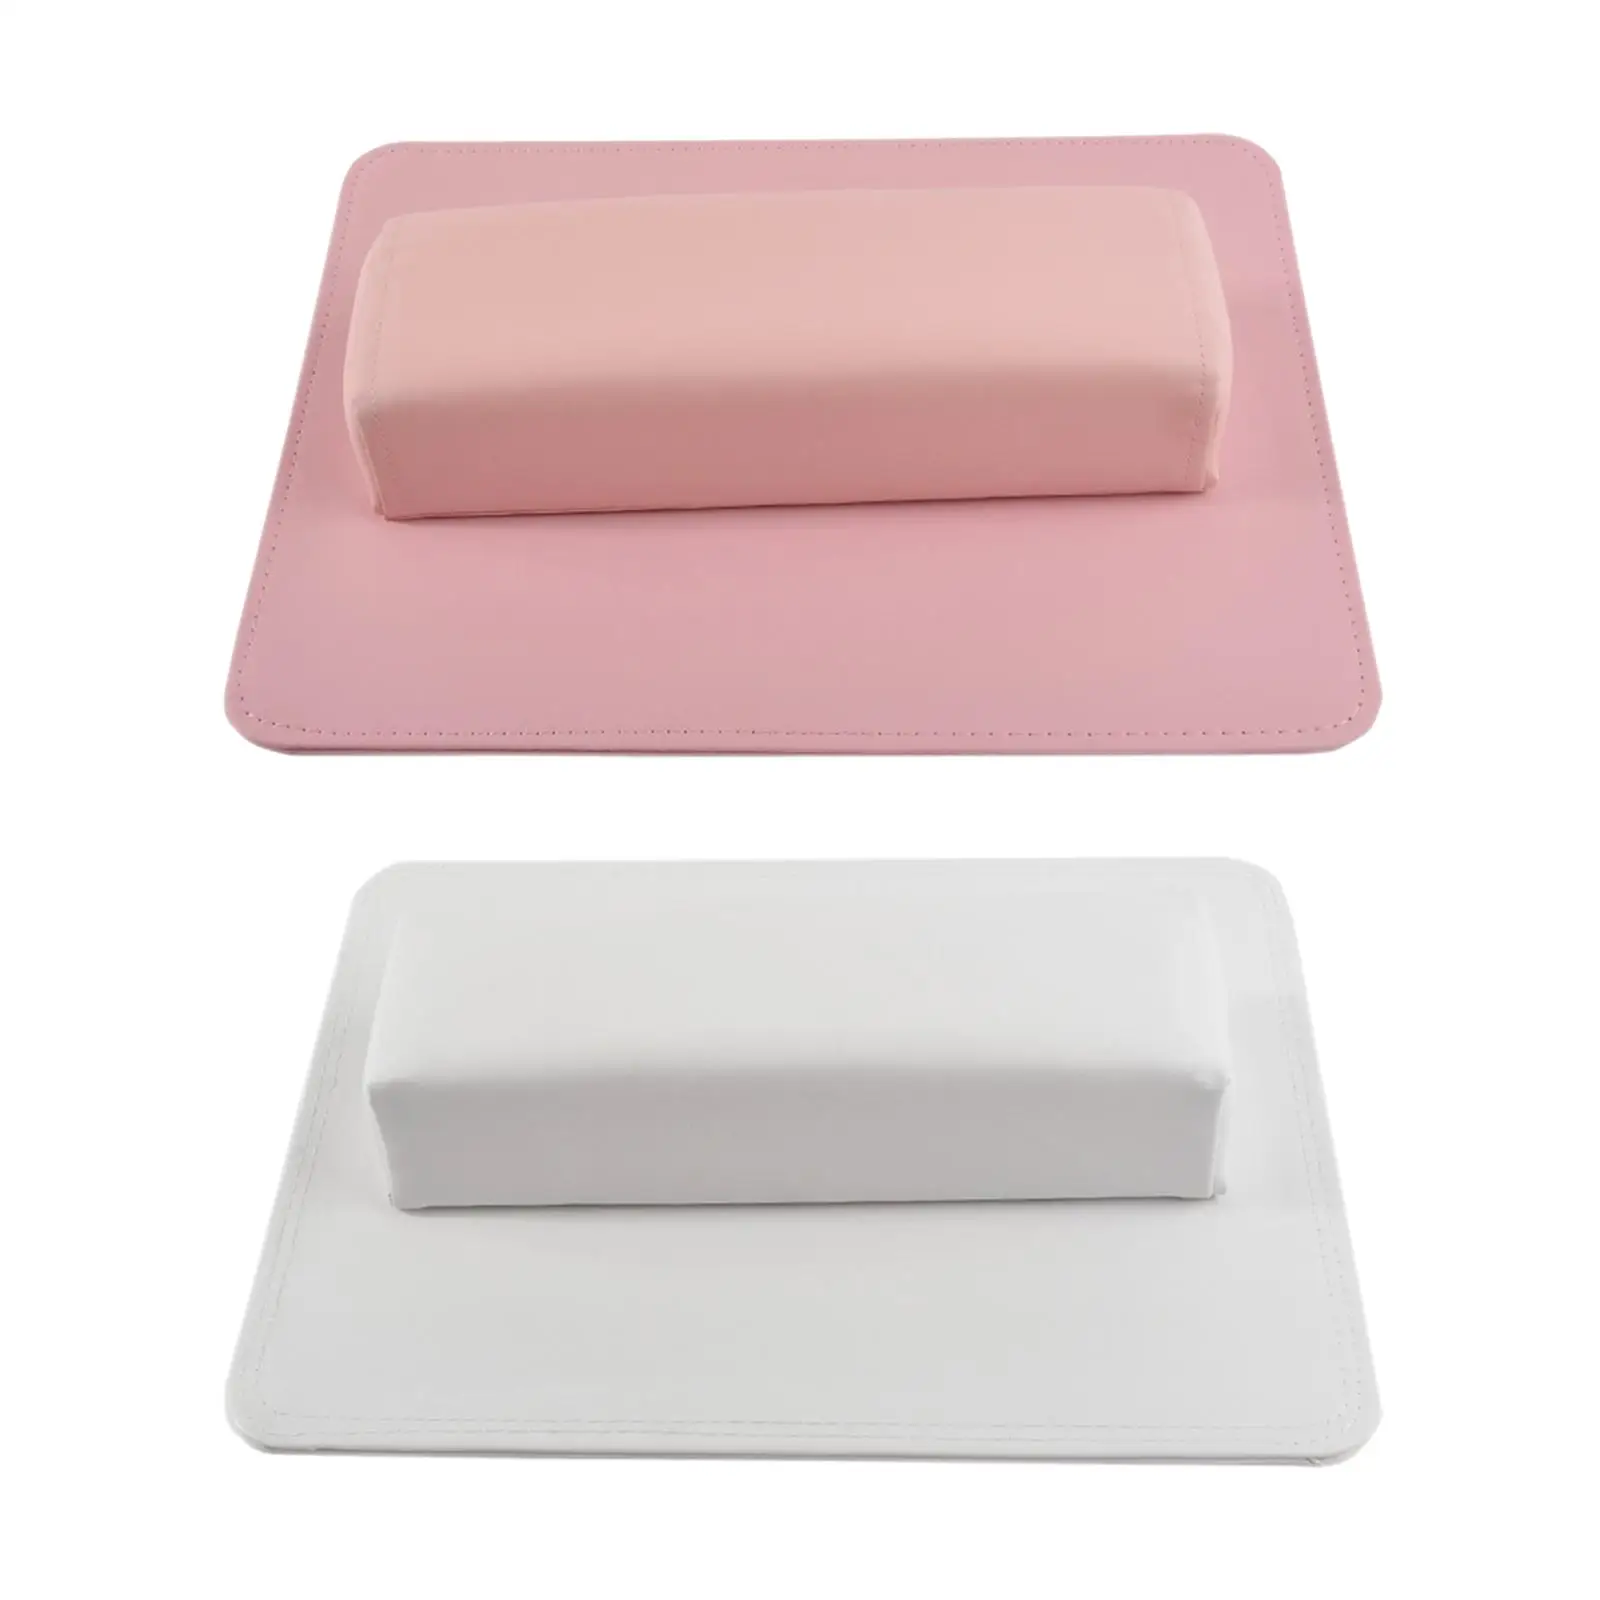 Nail Hand Pillow and Mat Set Nail Hand Rest Nail Table Mat Wrist Arm Pad for Home